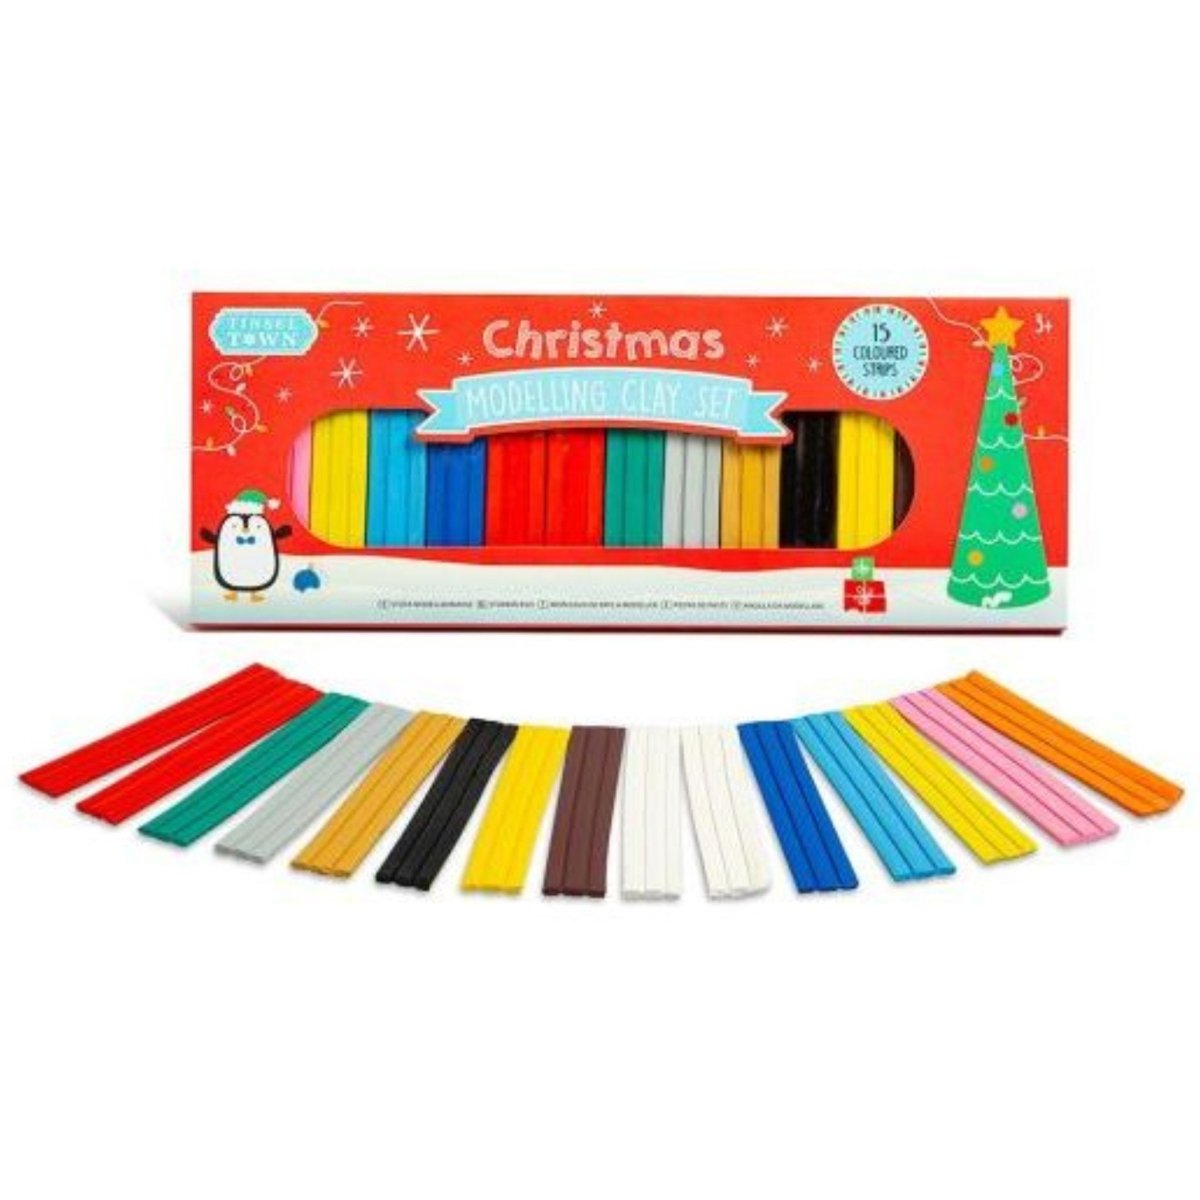 Christmas Modelling Clay Set 15 Piece - Kids Party Craft